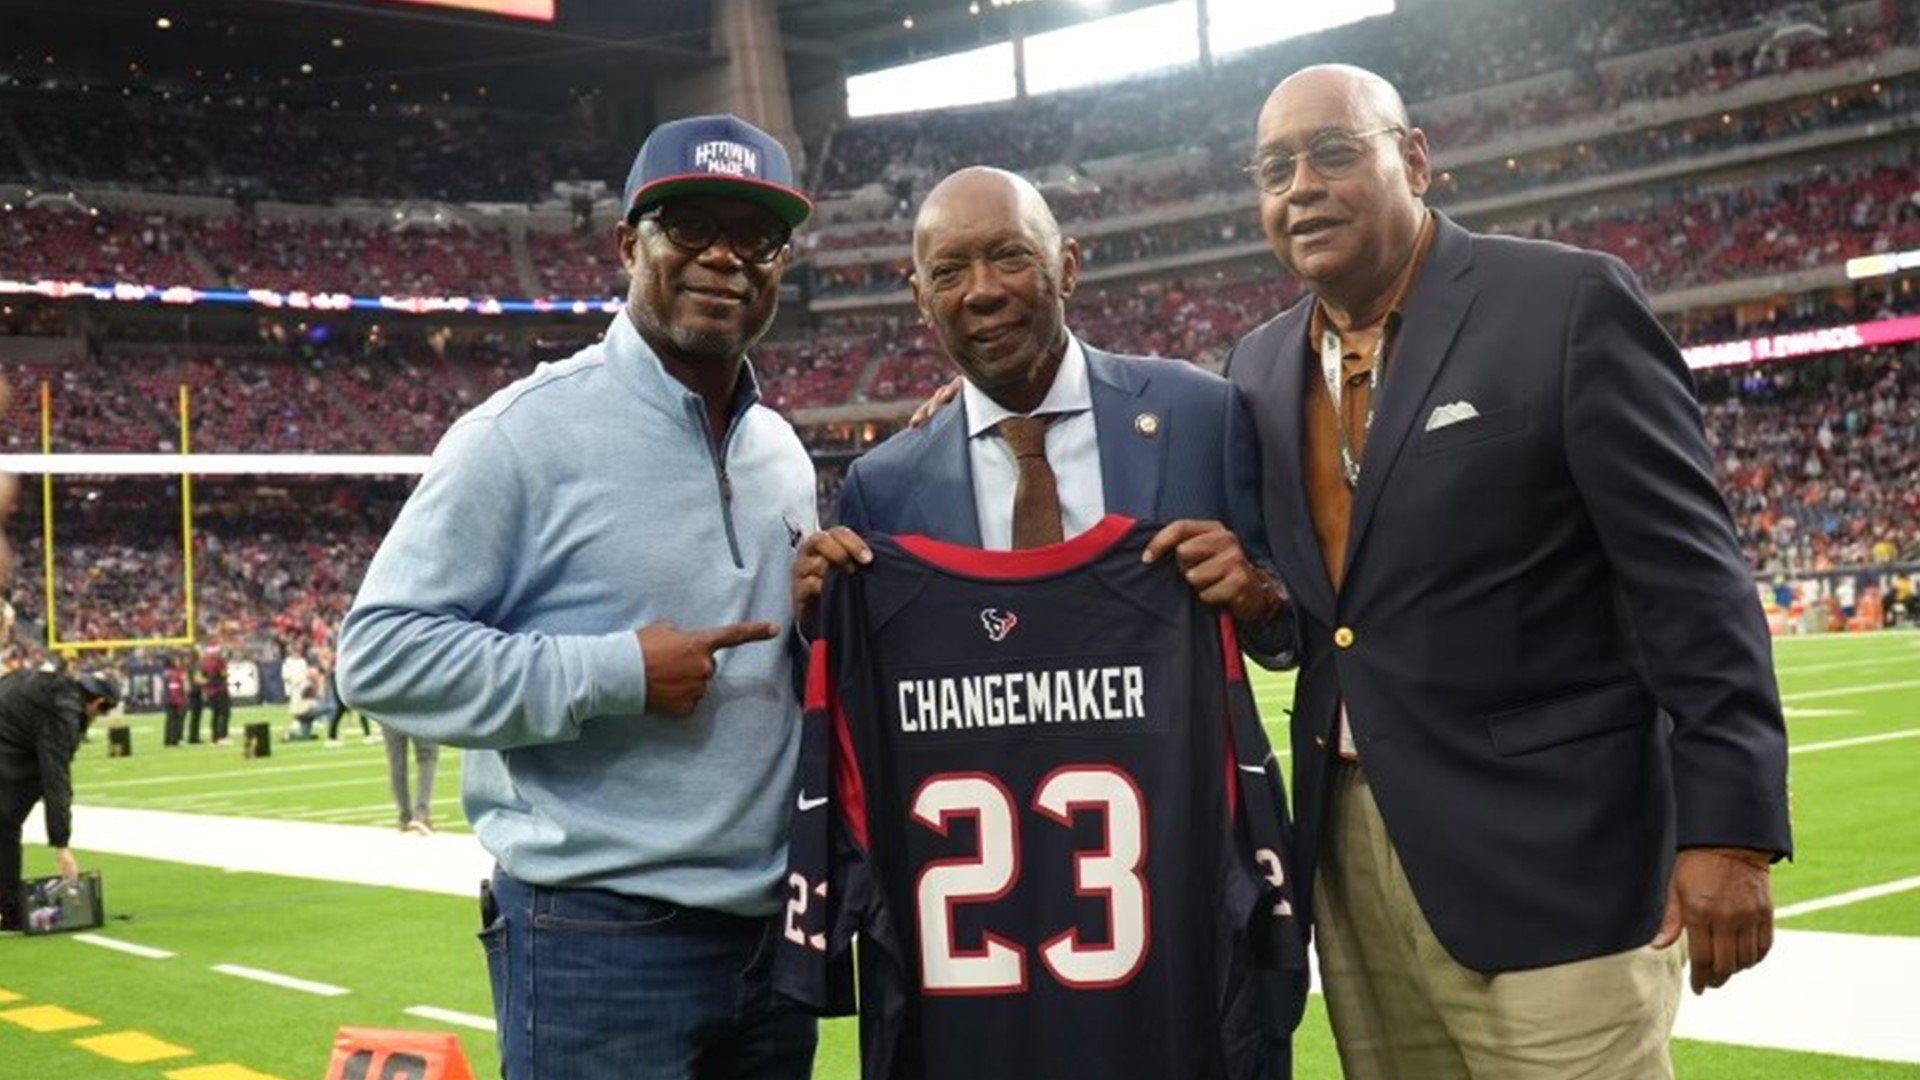 The Houston Texans nominated Mayor Turner for the "Inspire Change Changemaker Award." The award is given to individuals who "go above and beyond."